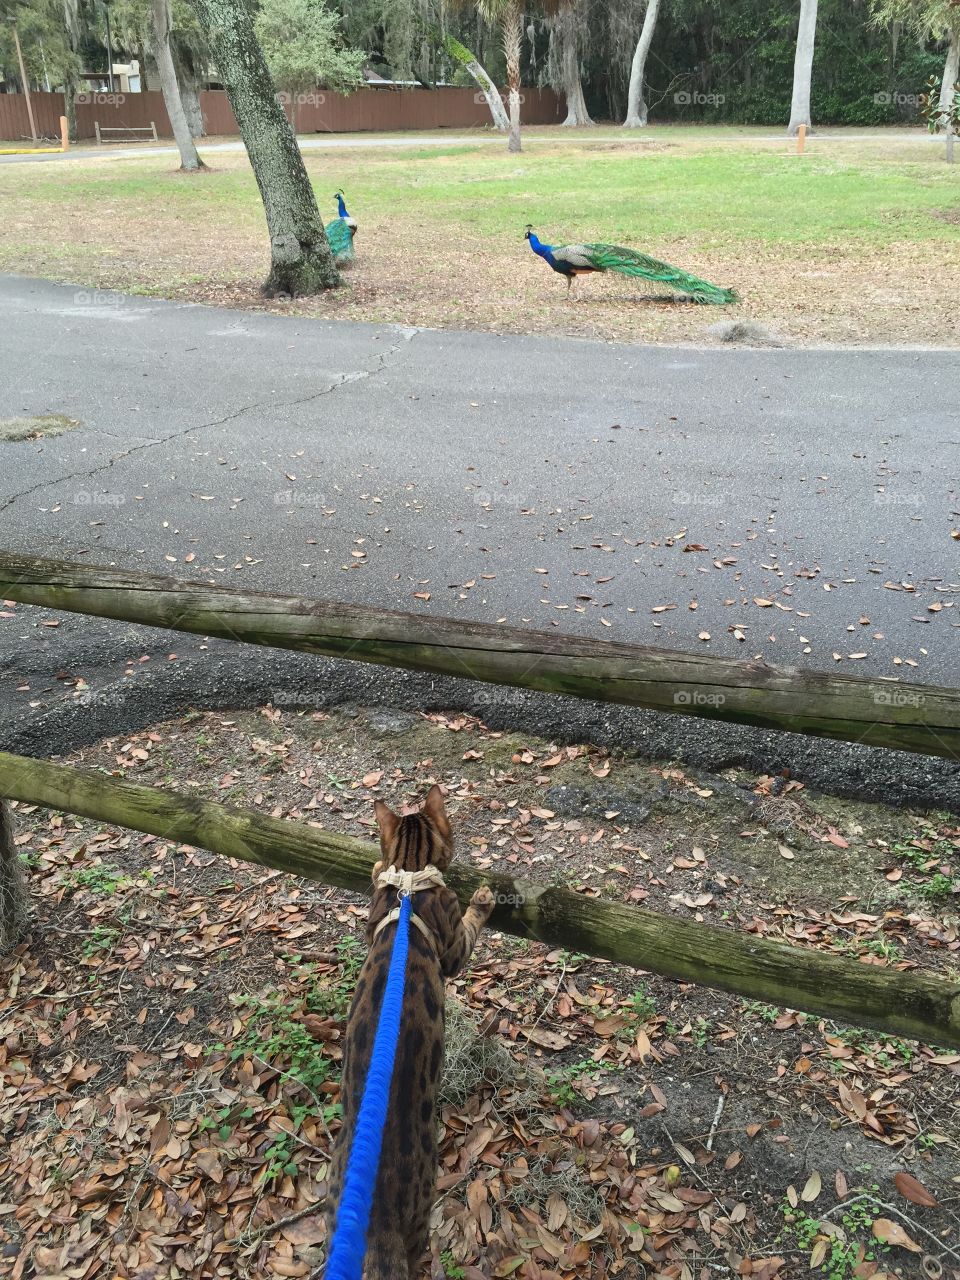 Taking my cat on a walk and we stumble upon a wild peacock roaming the park. 